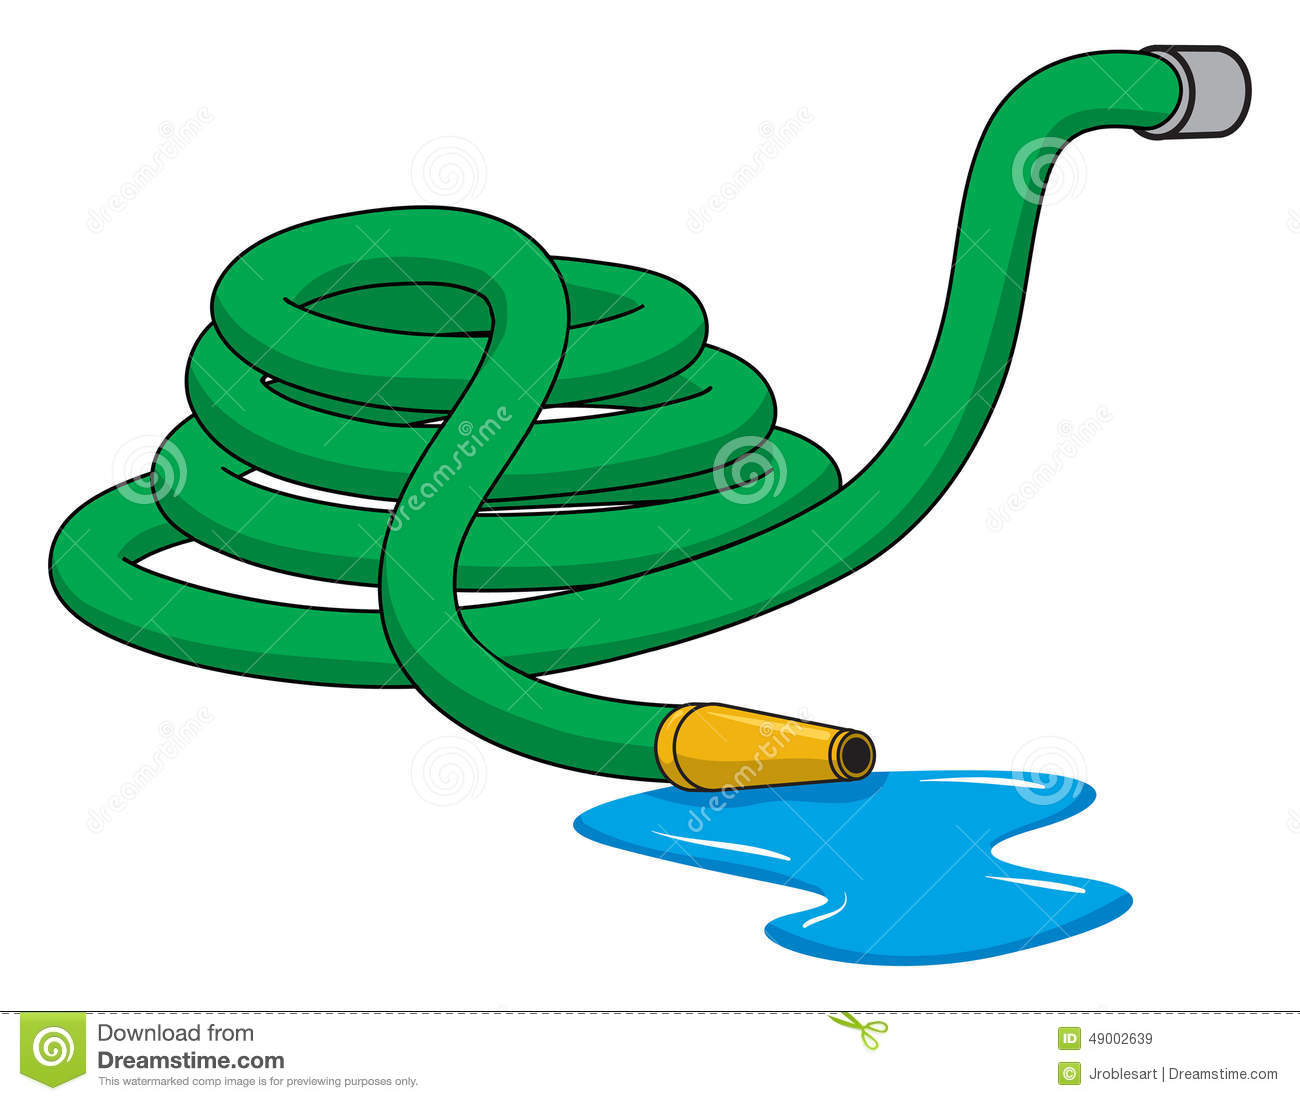 An Illustration Of A Green Rolled Up Garden Hose